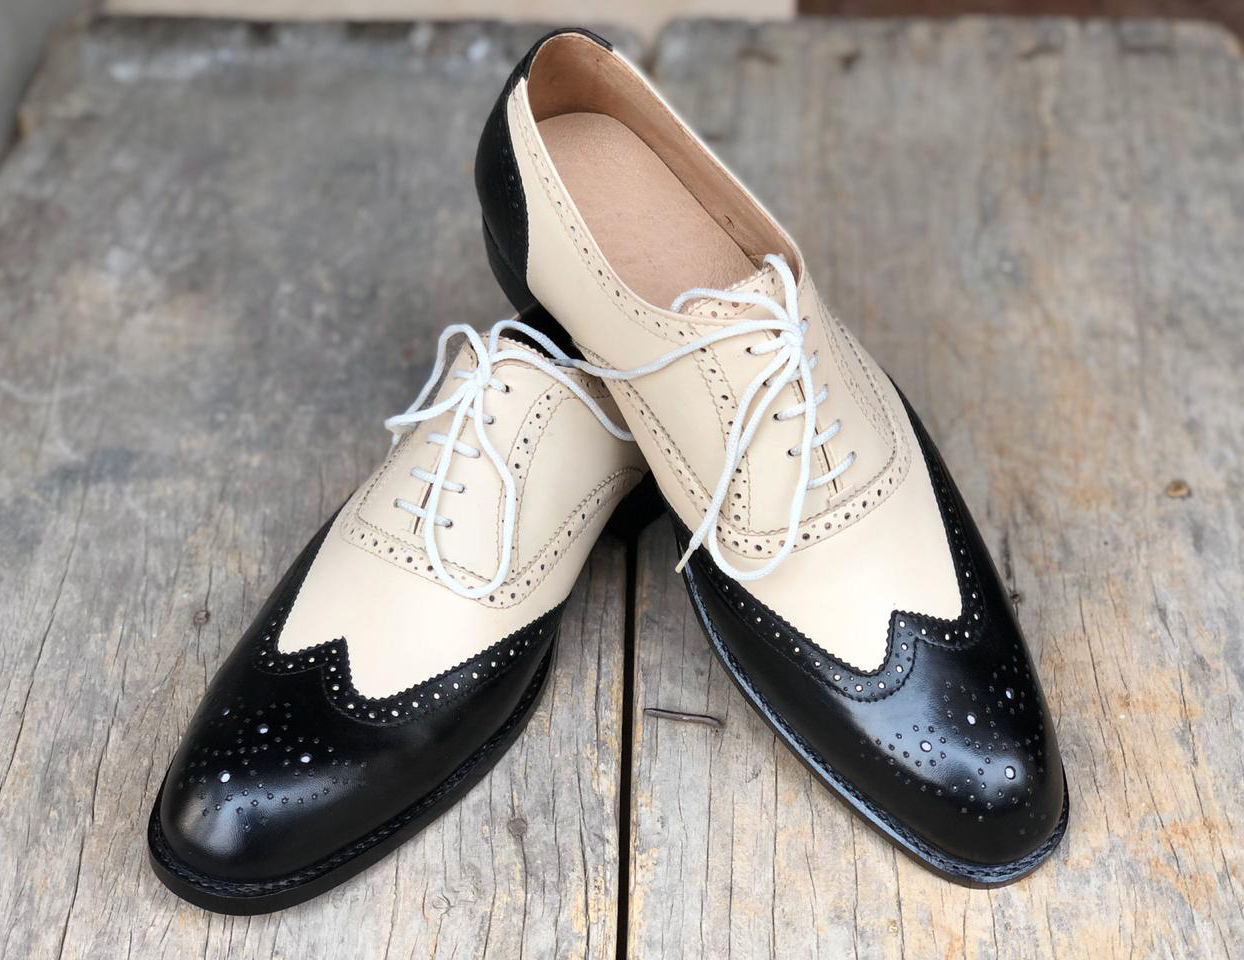 Handmade Men White Black Lace Up Brogue Wing Tip